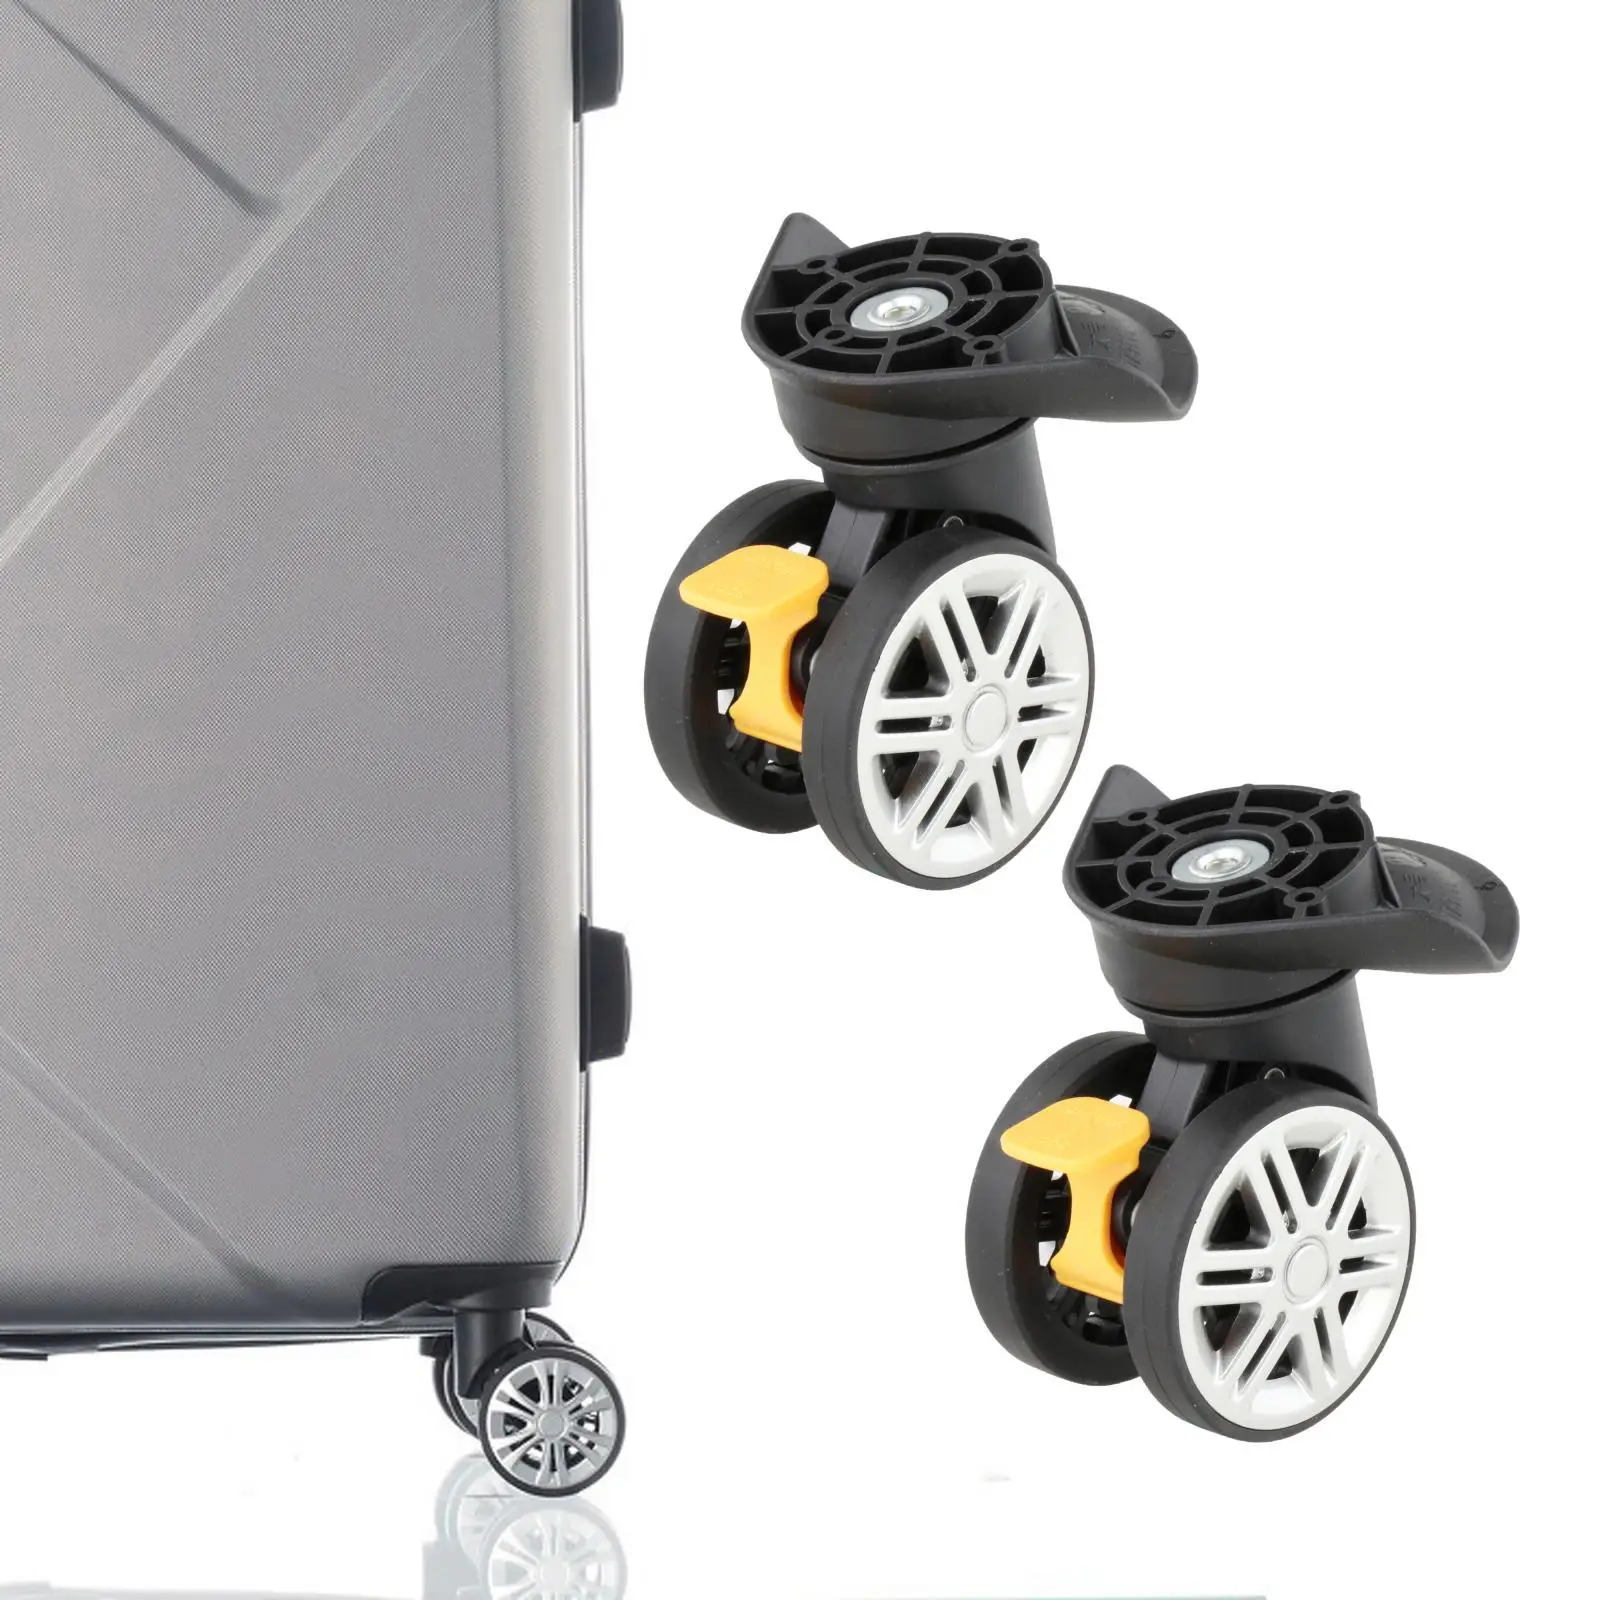 2x Replacement Luggage Wheels A19 360 Degree Rotation Travel Suitcase Wheels Heavy Duty Luggage Mute Wheel for Travelling Bag